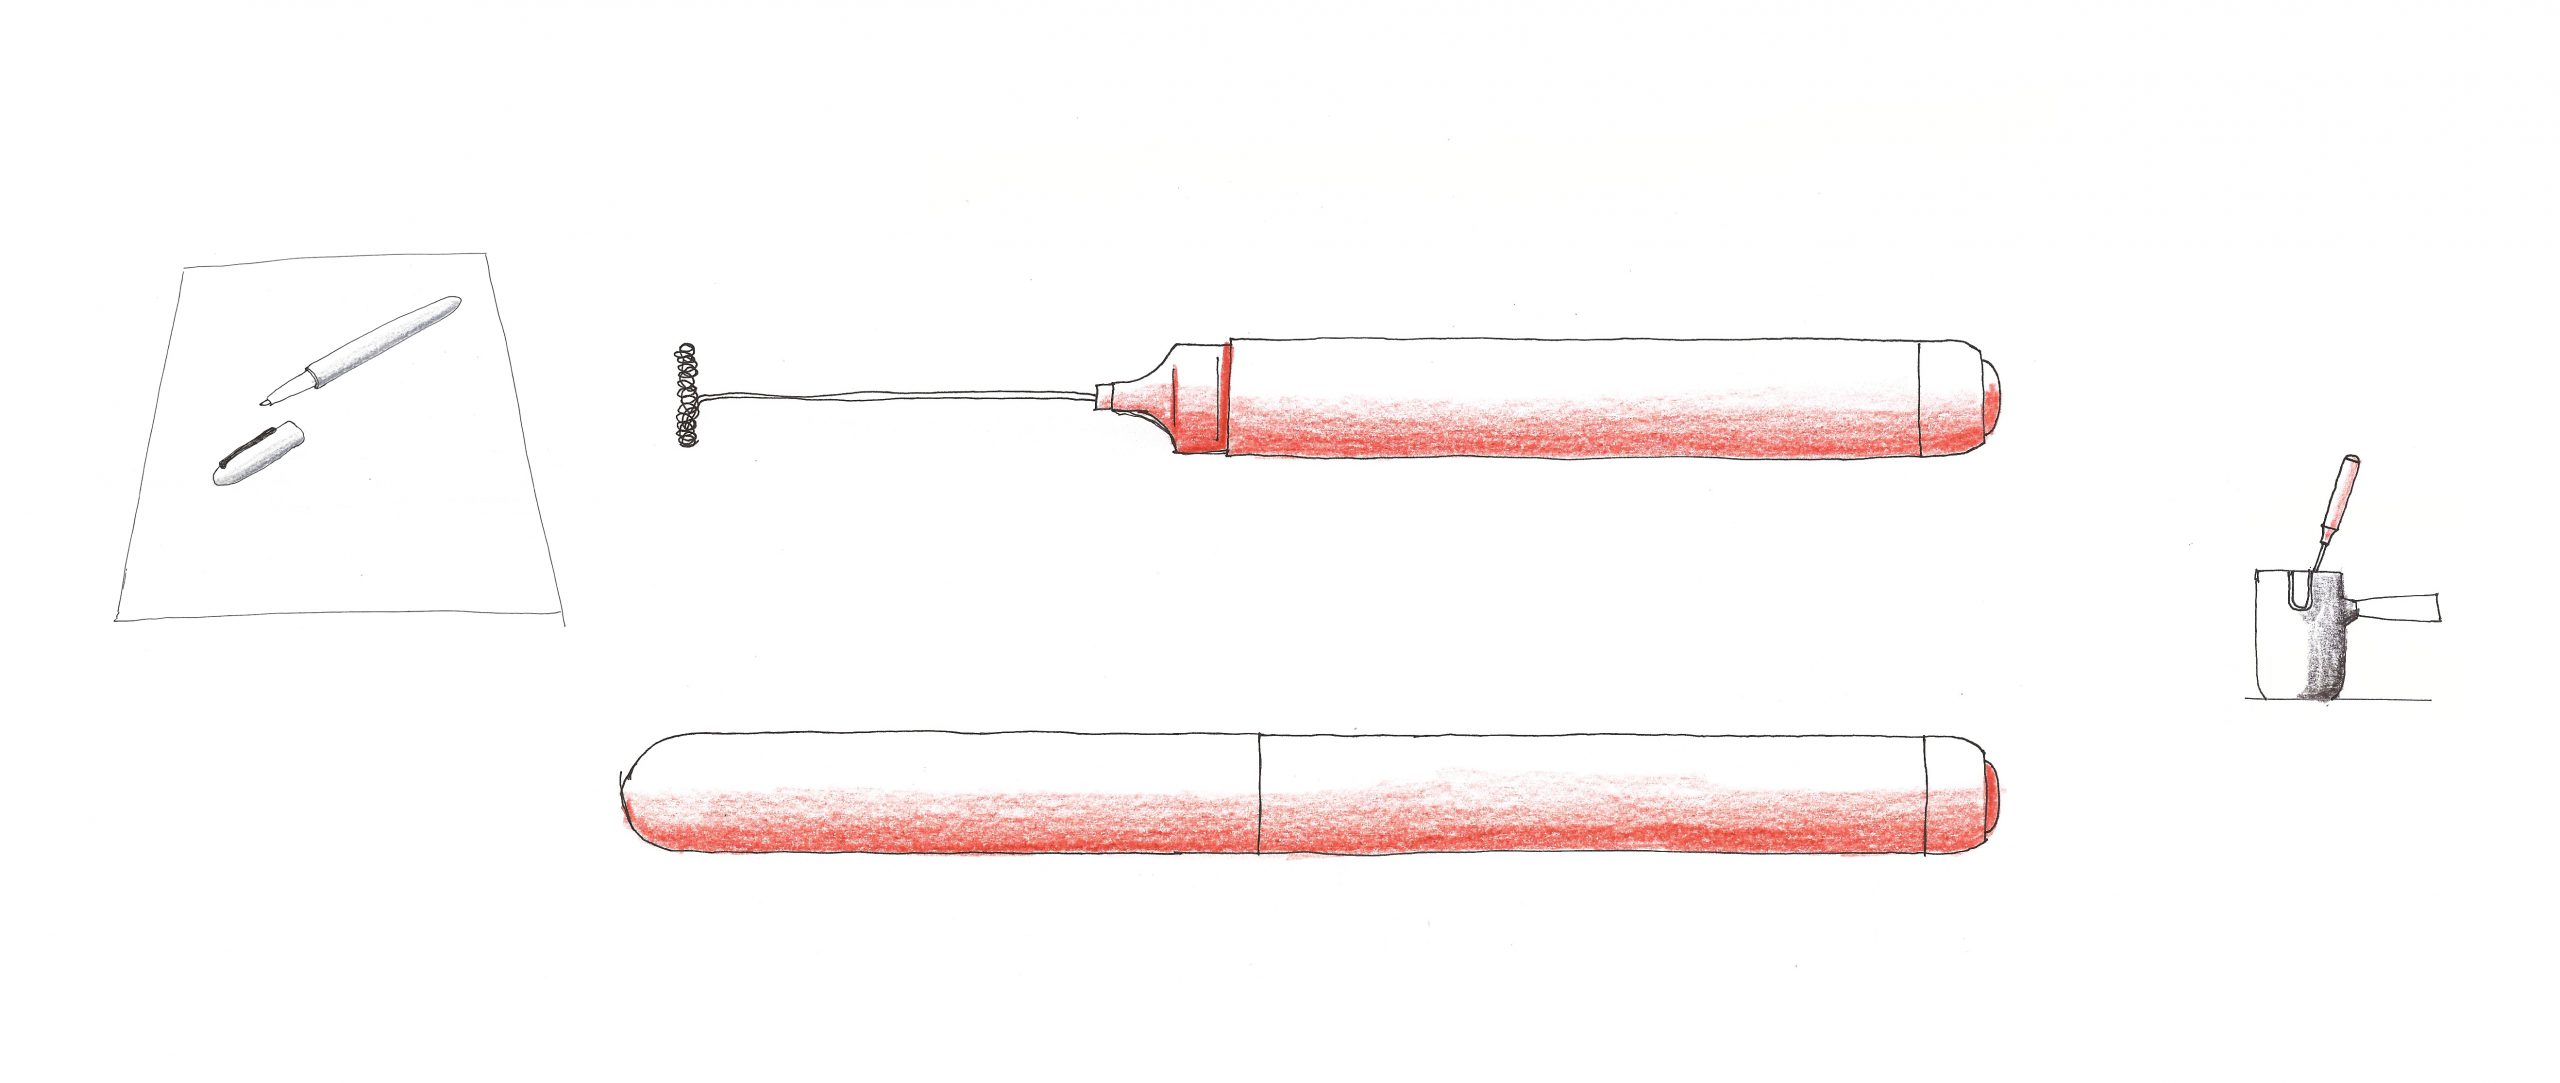 Sketch of Frothy milk frother by Debiasi Sandri for RigTig